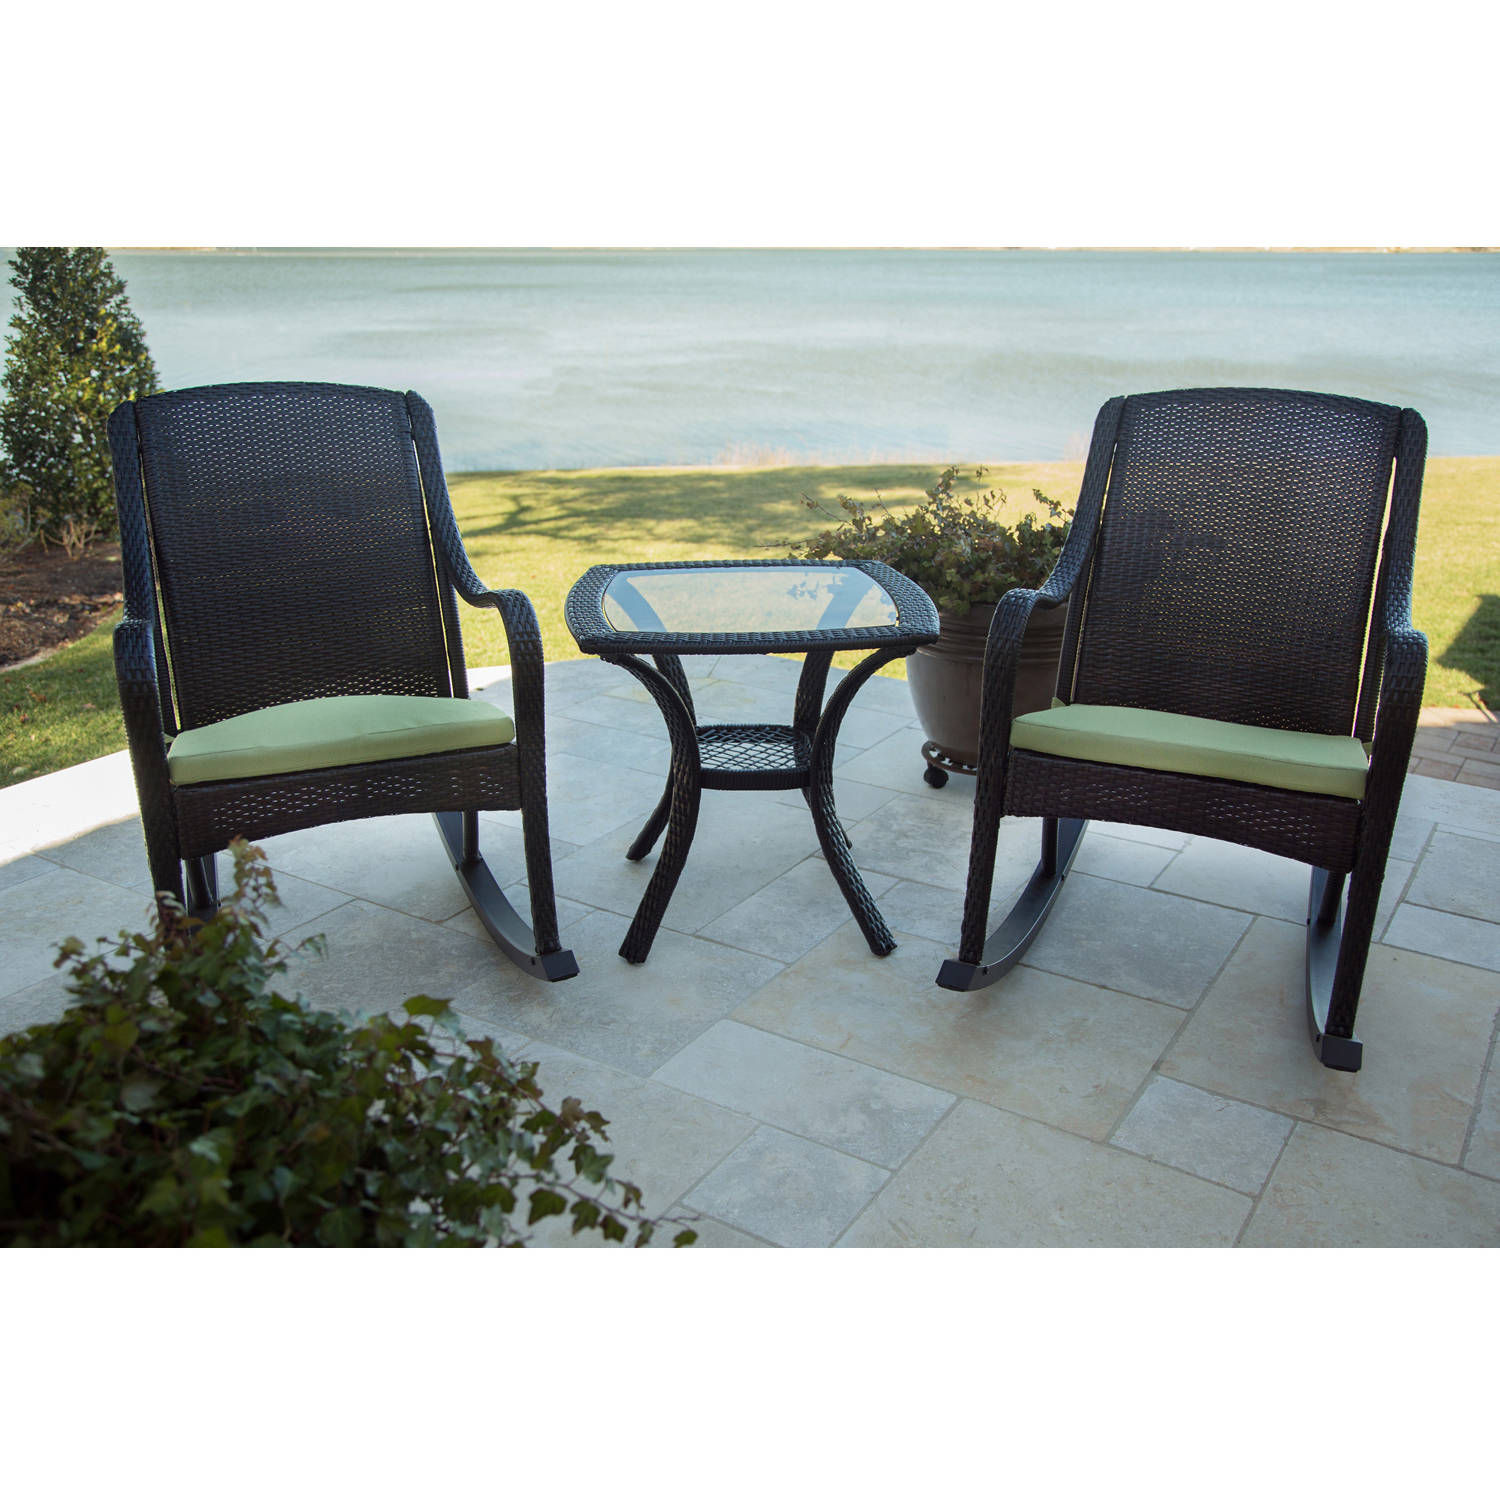 Hanover Outdoor Orleans 3-Piece Porch Rocker Set with Cushions, Avocado Green/French Roast - image 1 of 4